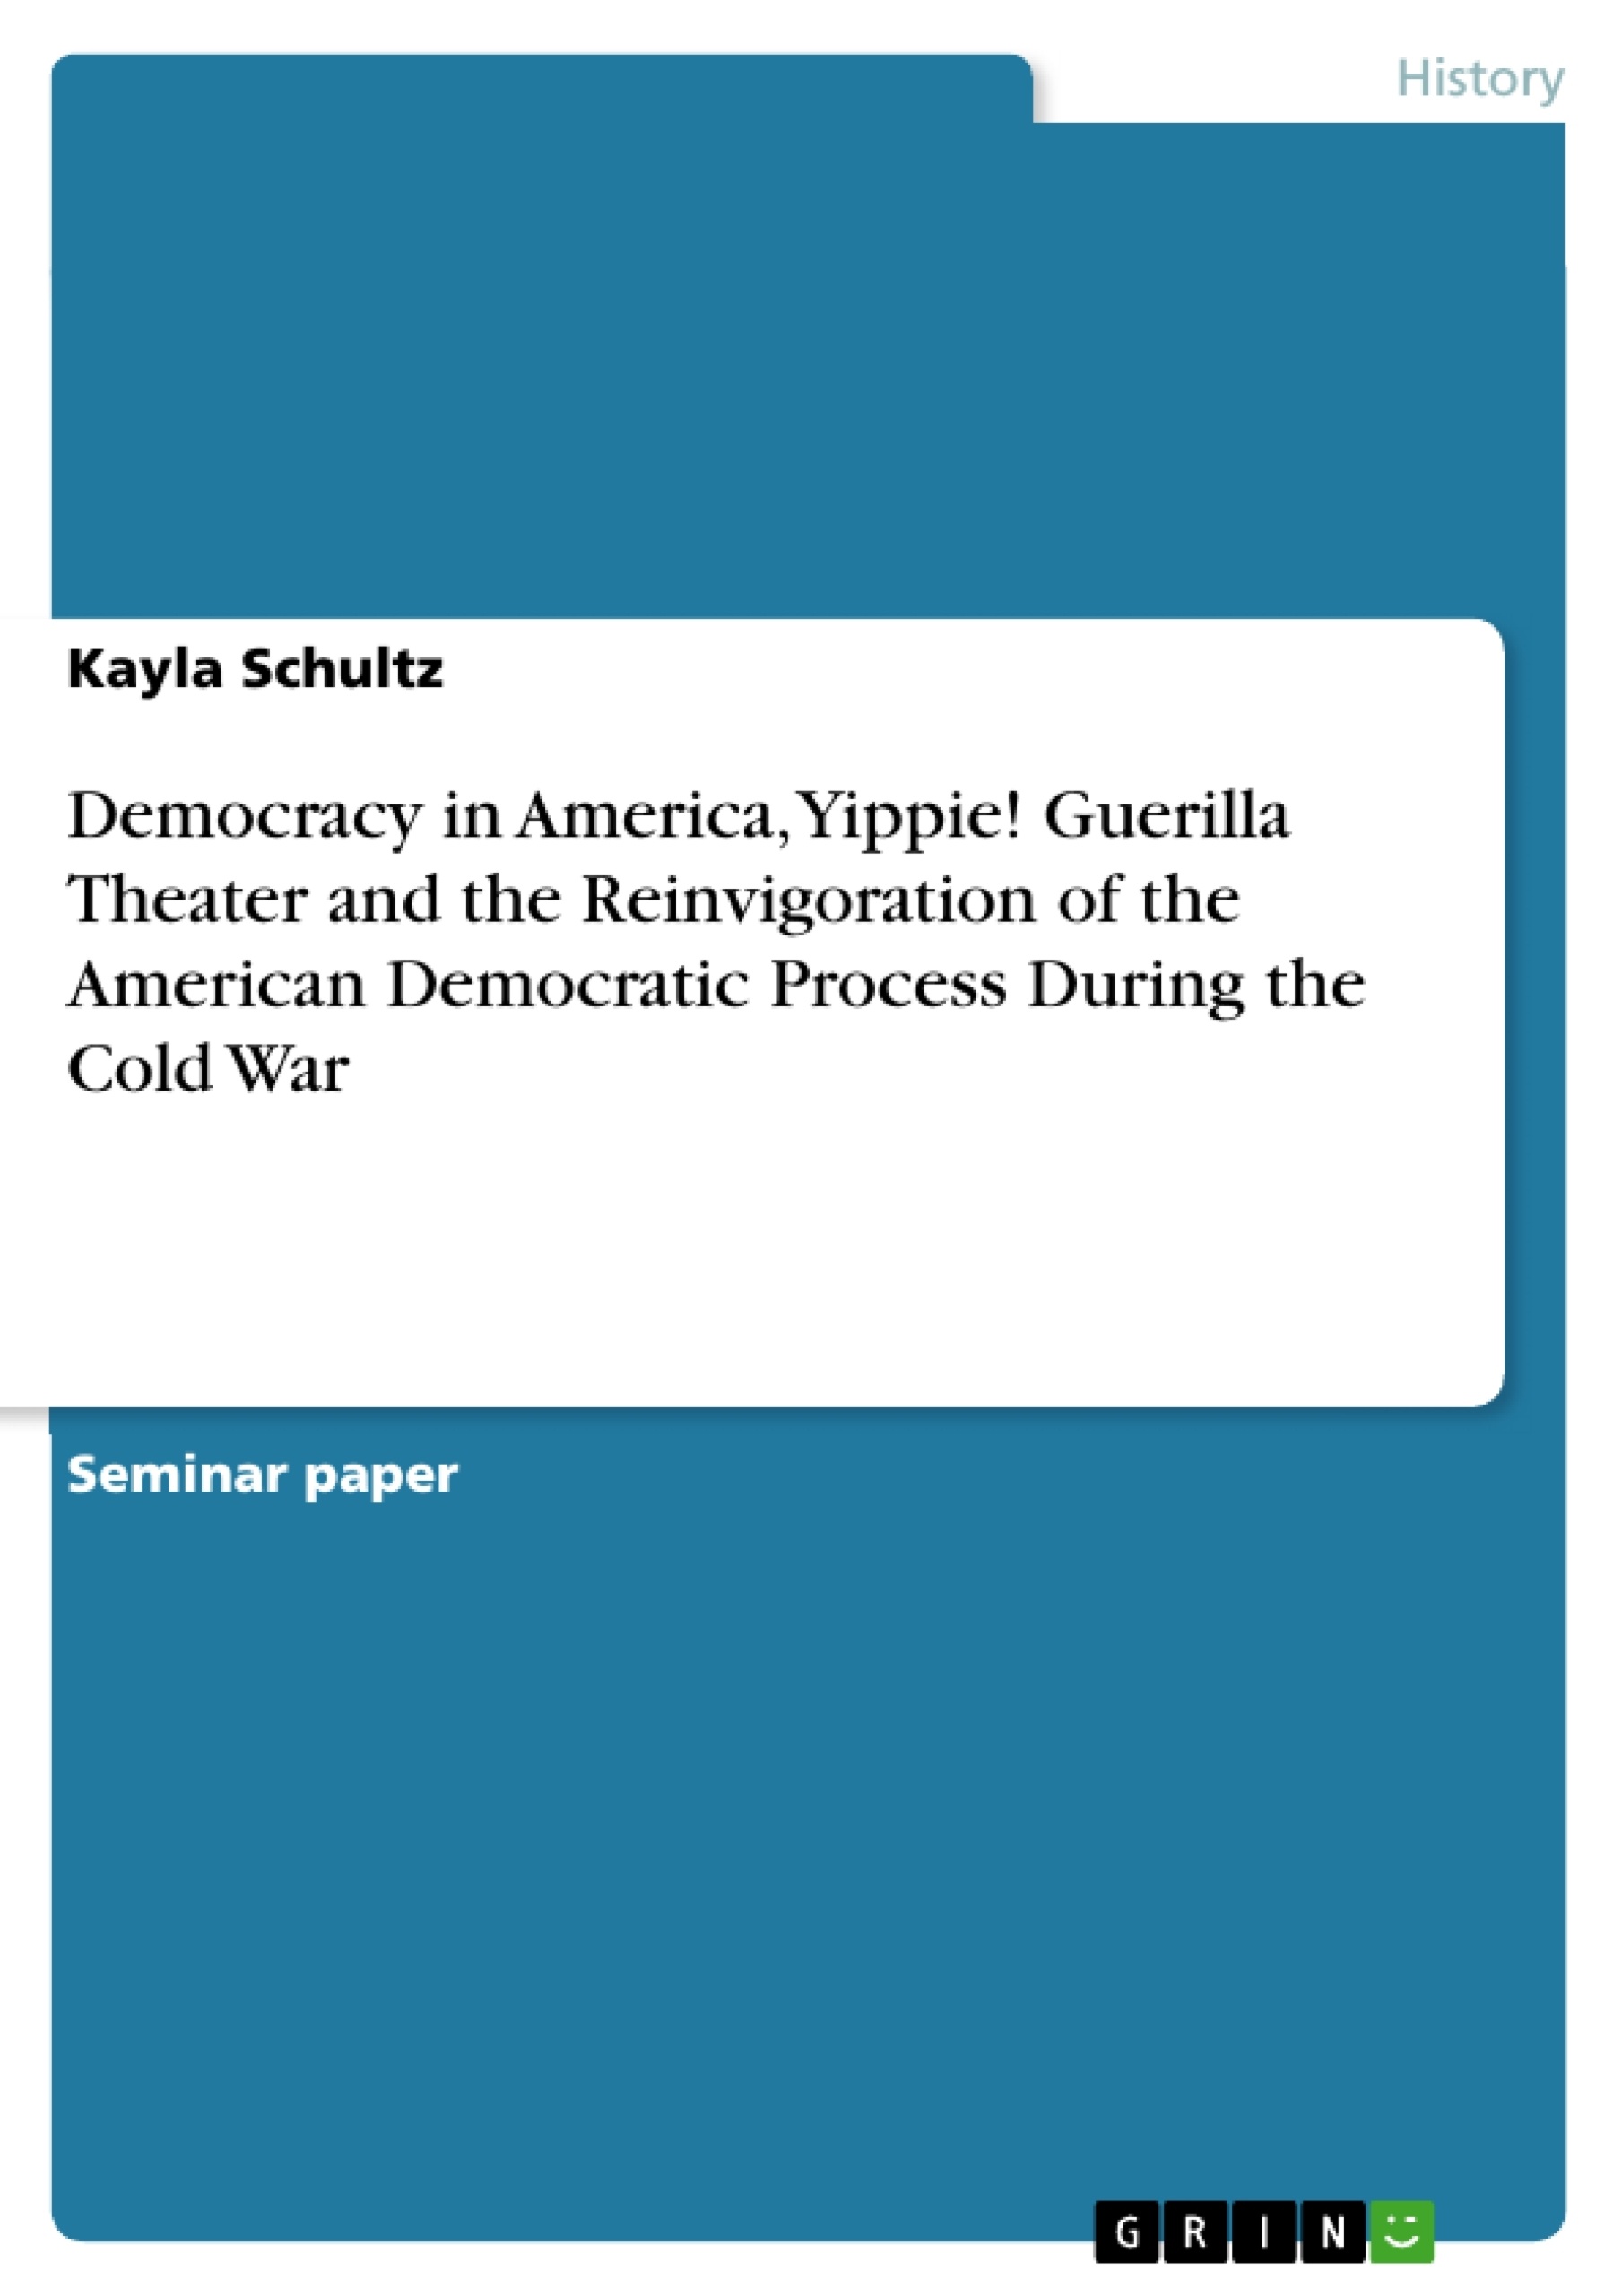 Titre: Democracy in America, Yippie! Guerilla Theater and the Reinvigoration of the American Democratic Process During the Cold War